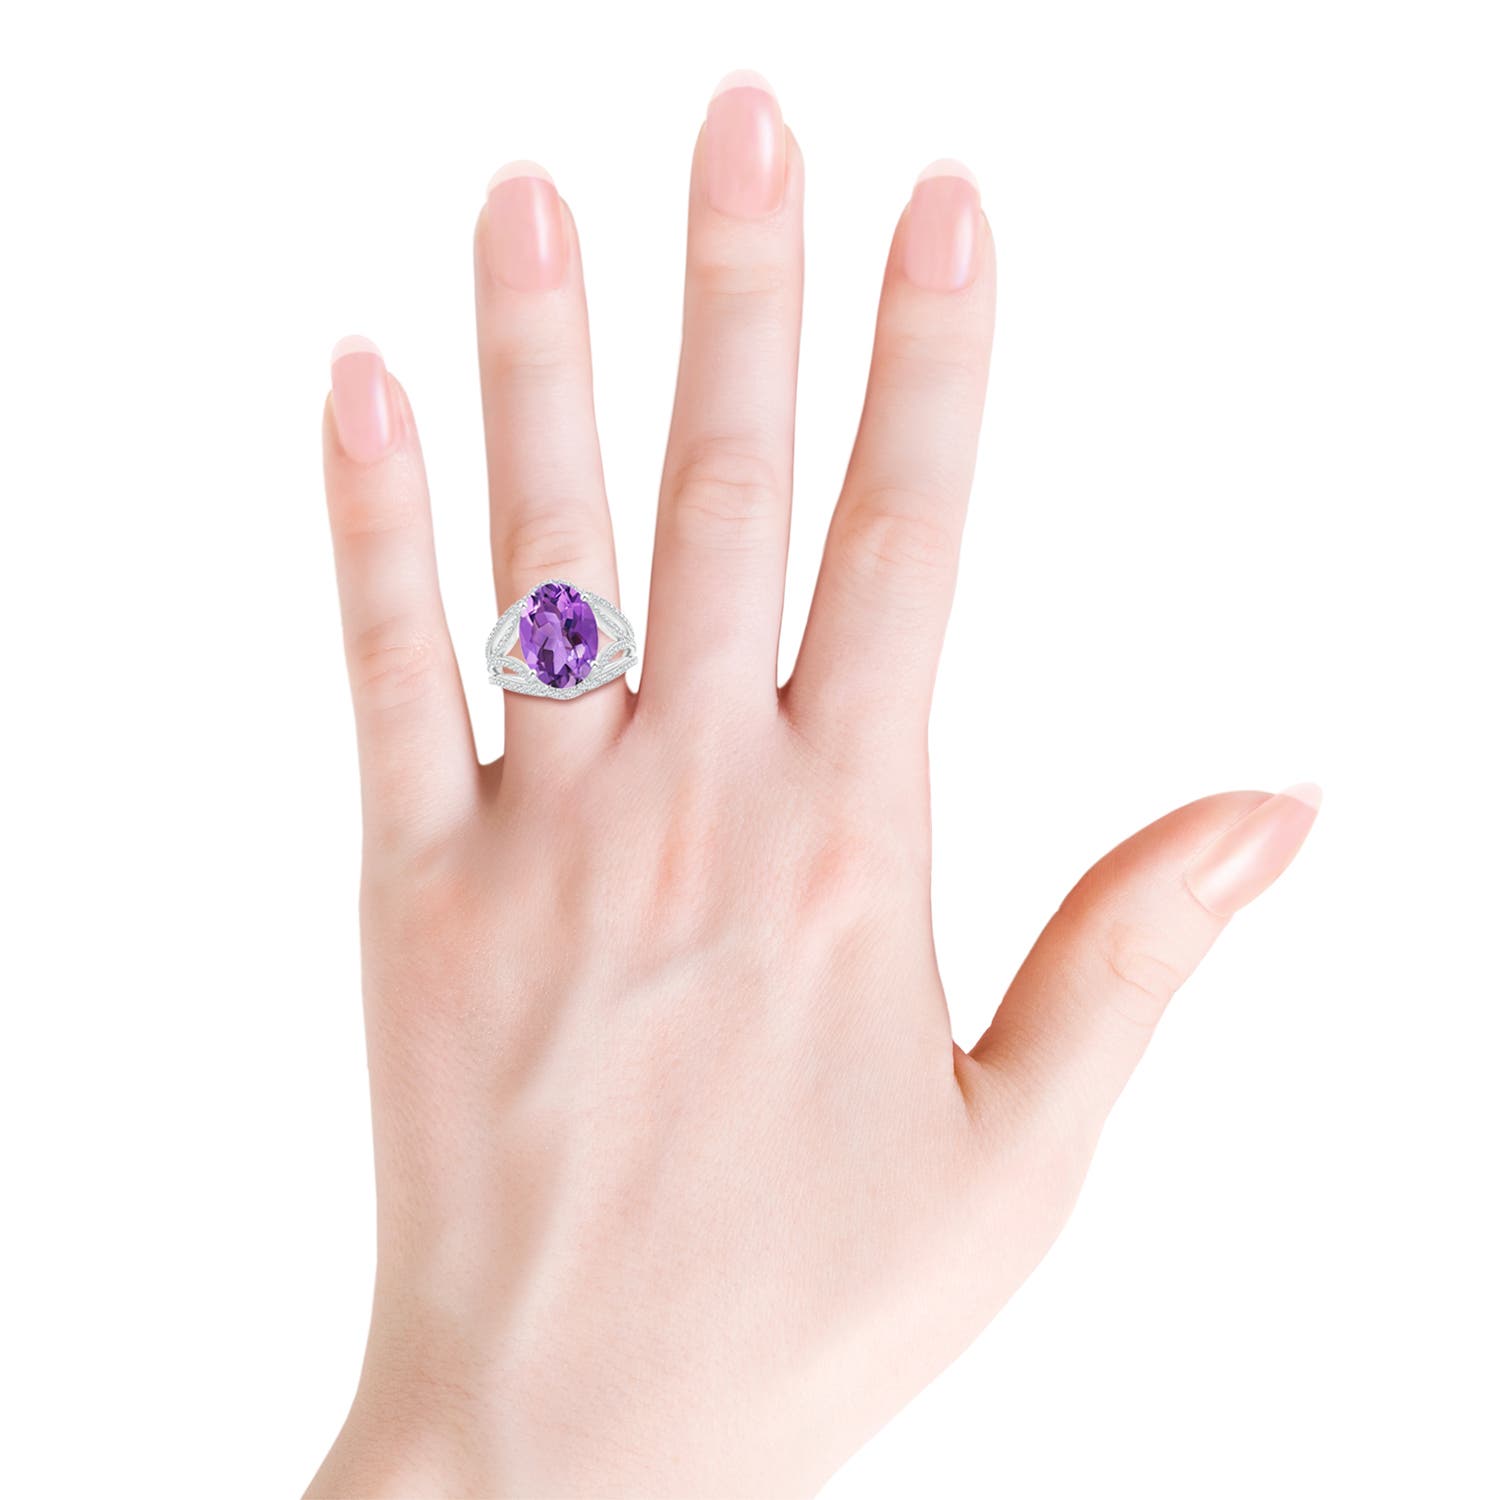 AA - Amethyst / 5.89 CT / 14 KT White Gold